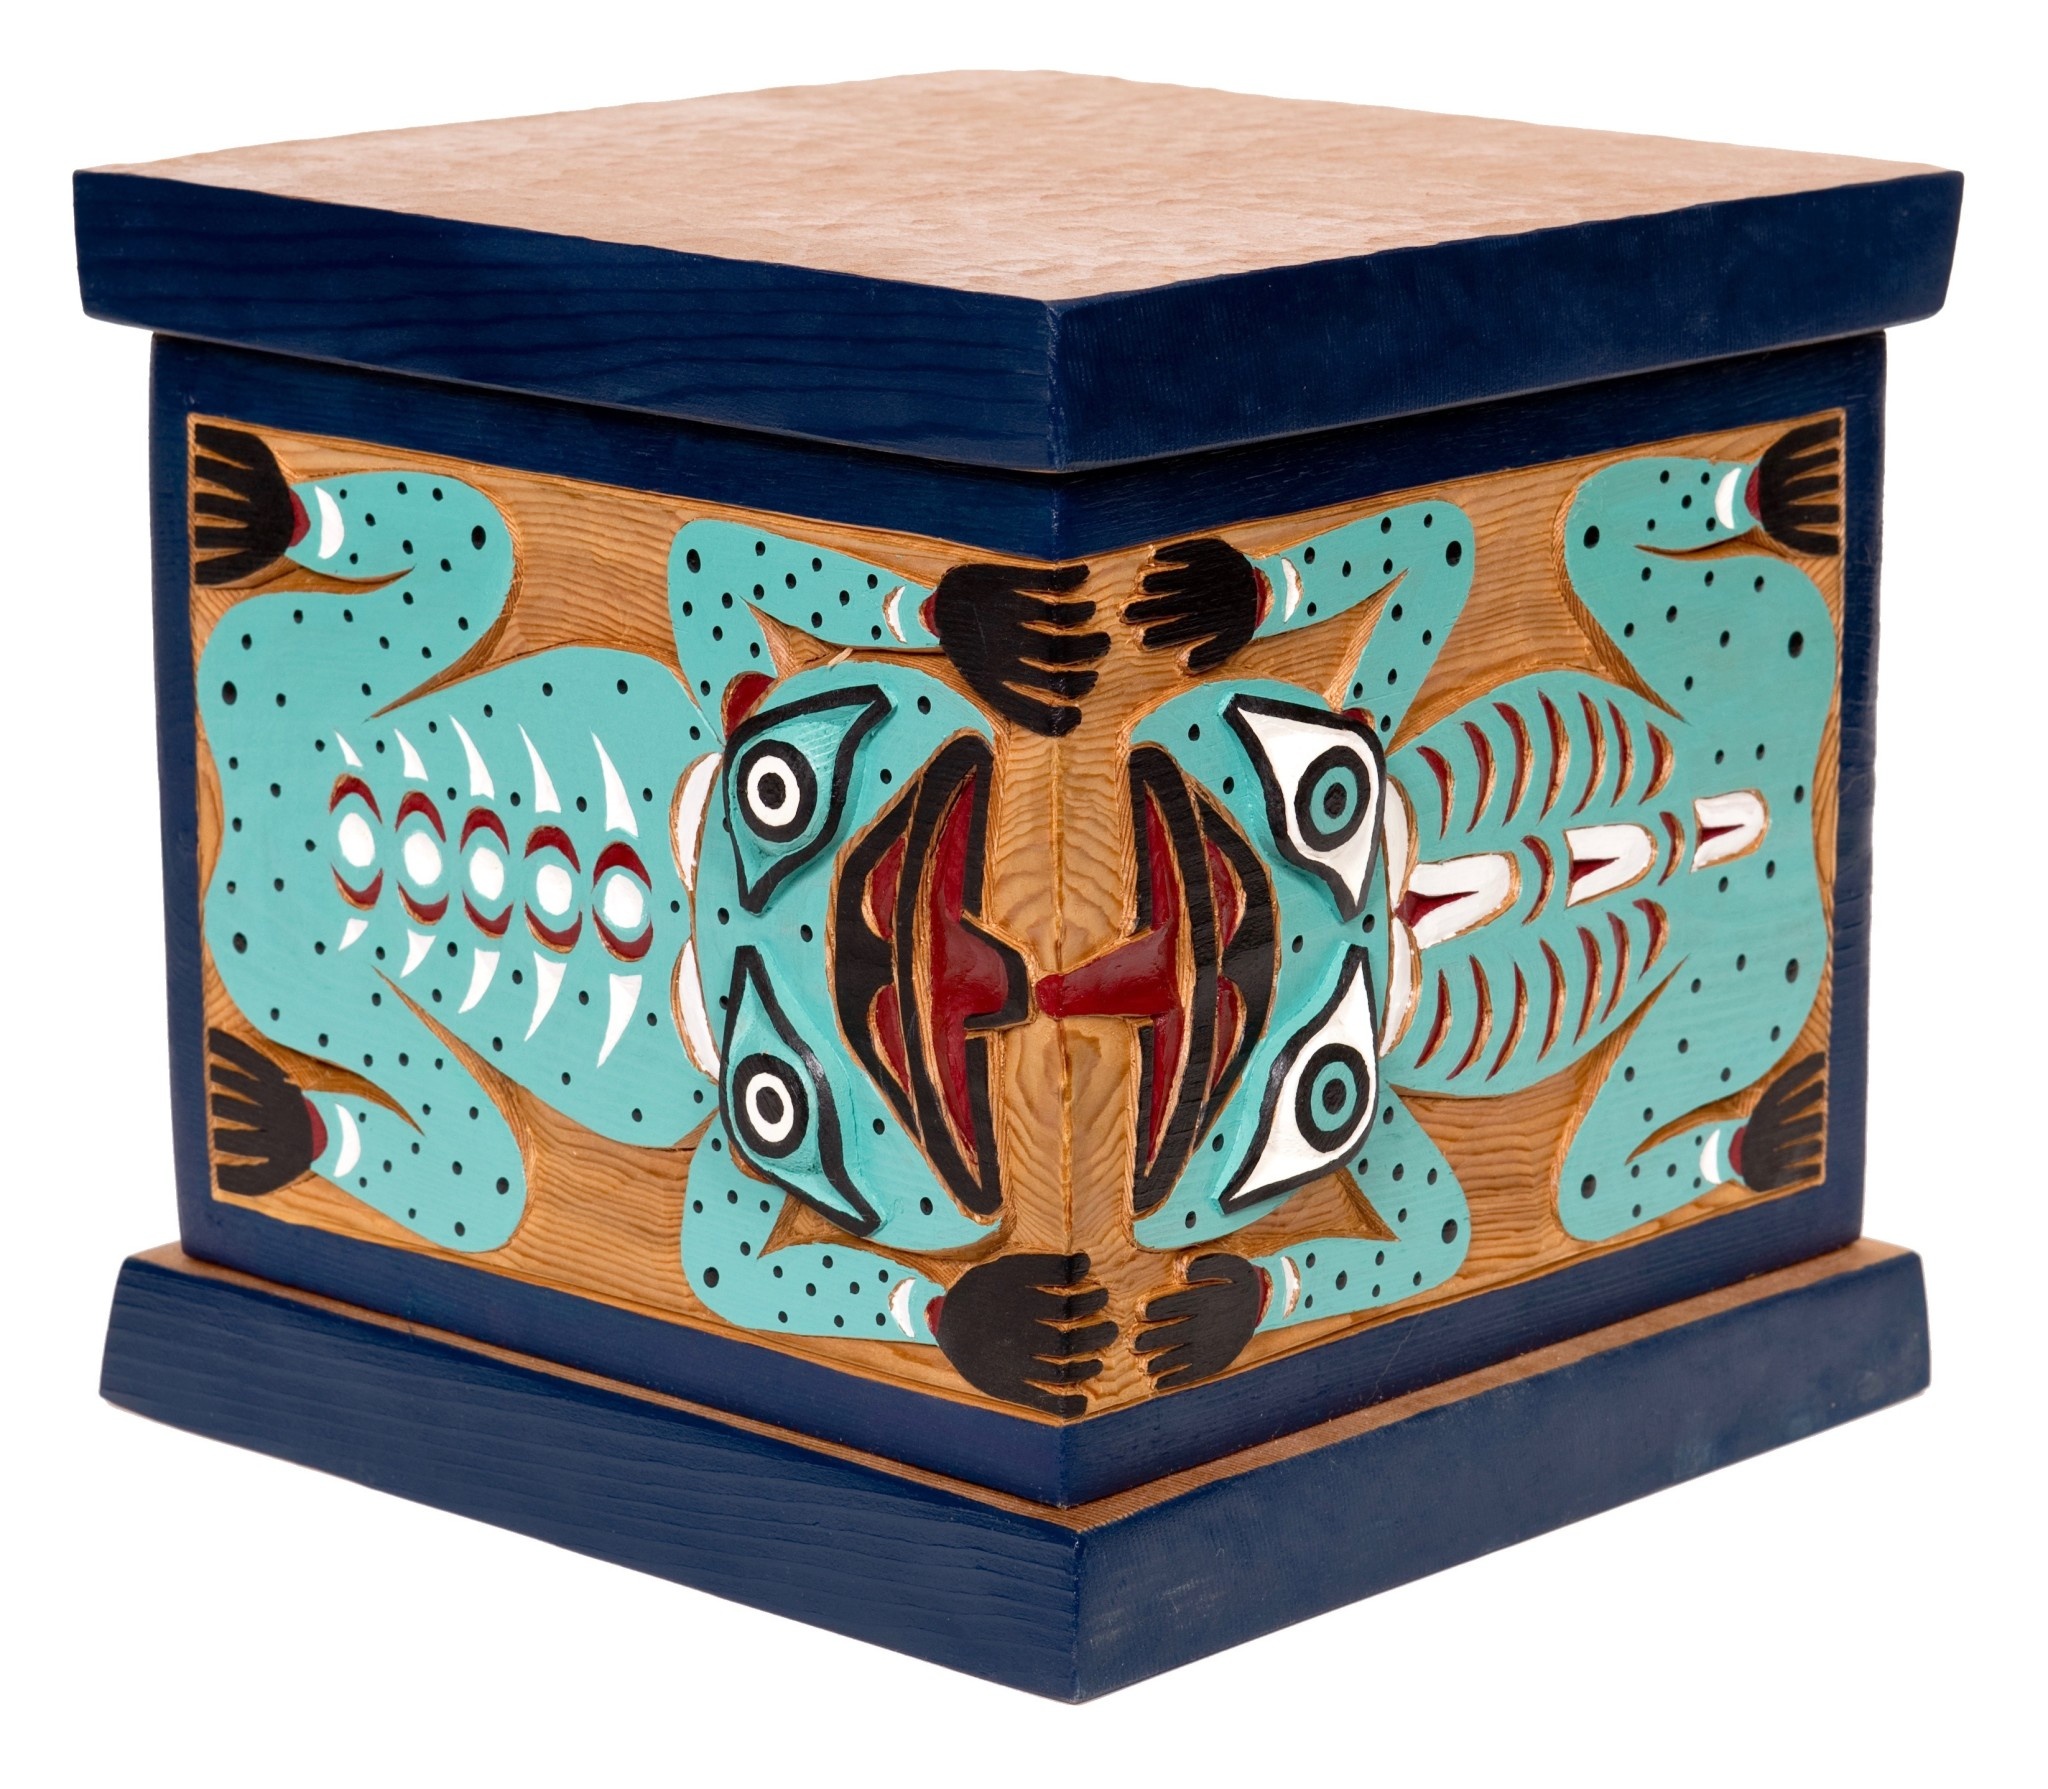 Steam bent box constructed, carved and painted with Traditional Coast Salish design - Frog, Wolf, Human.  10" square.